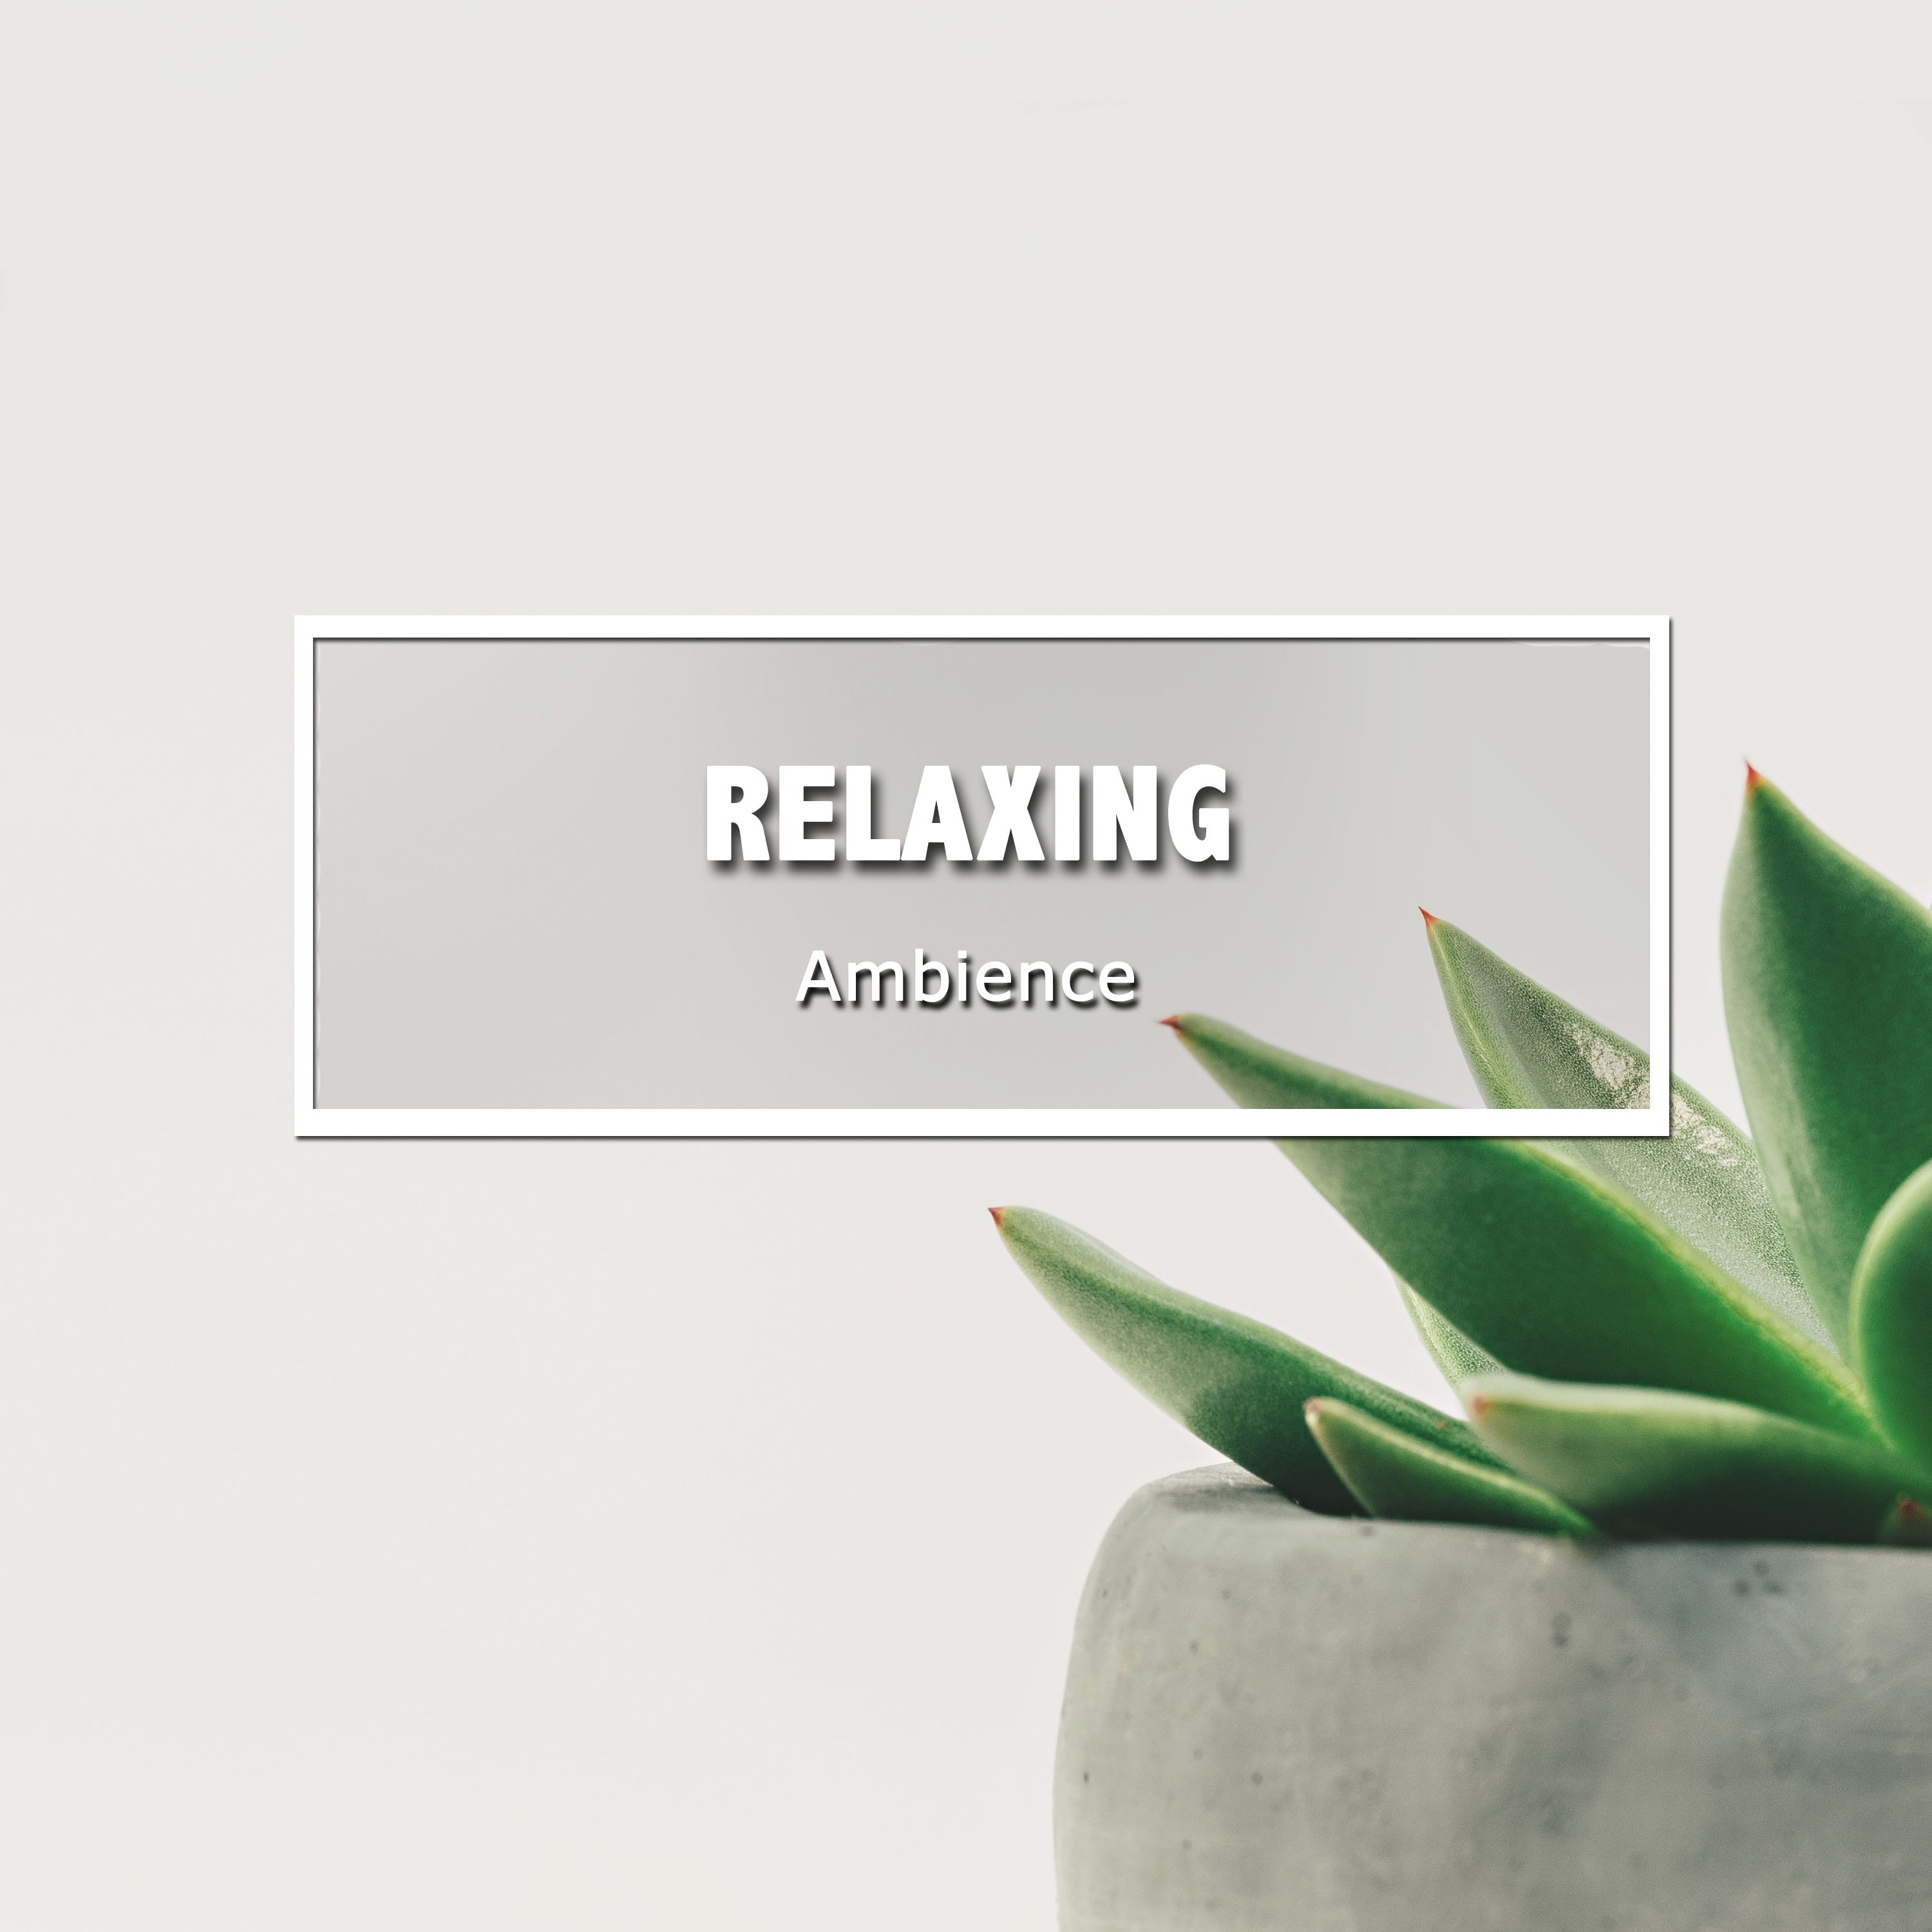 #17 Relaxing Ambience Tracks to Provide Focus